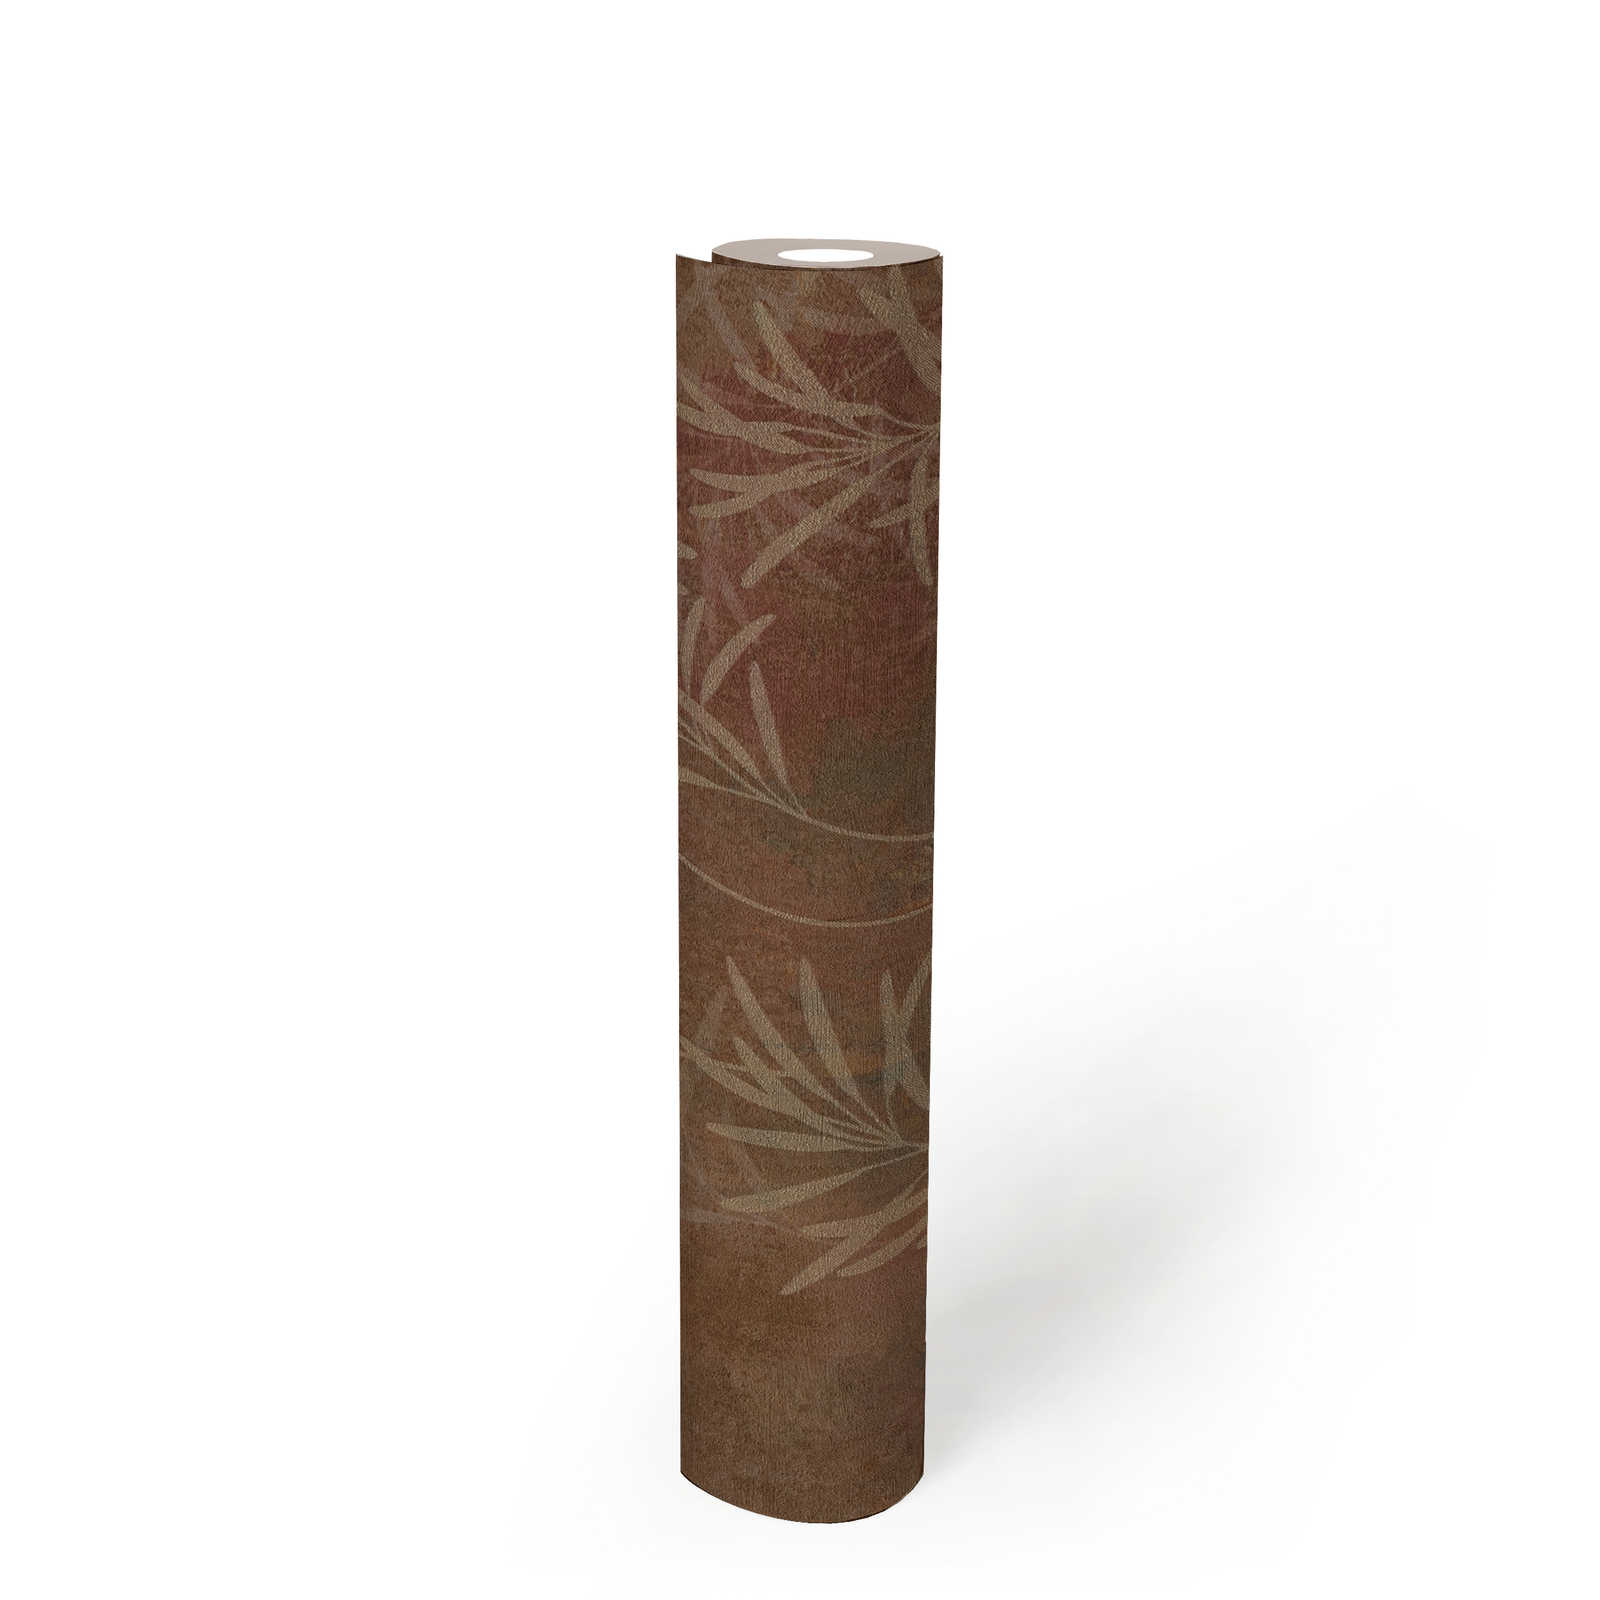             Floral non-woven wallpaper with grass pattern and fine structure - brown, beige, metallic
        